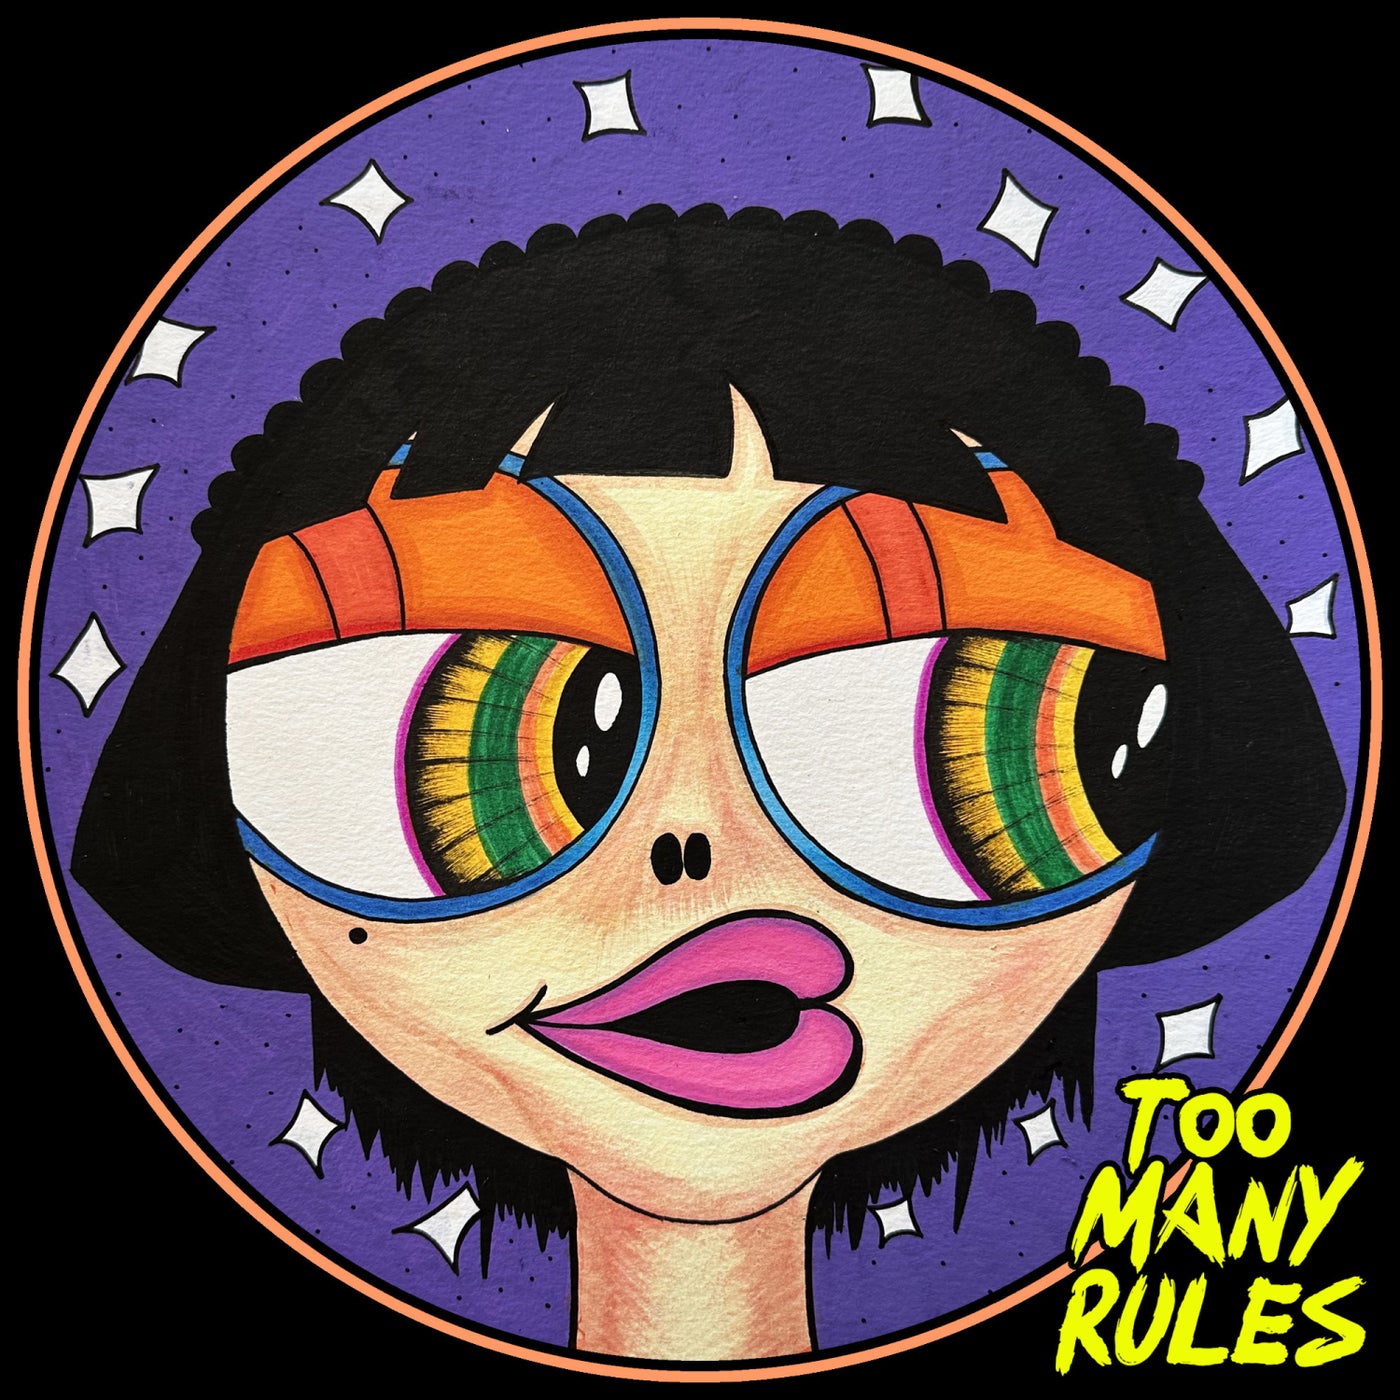 image cover: Dan Corco - Starblazer on Too Many Rules